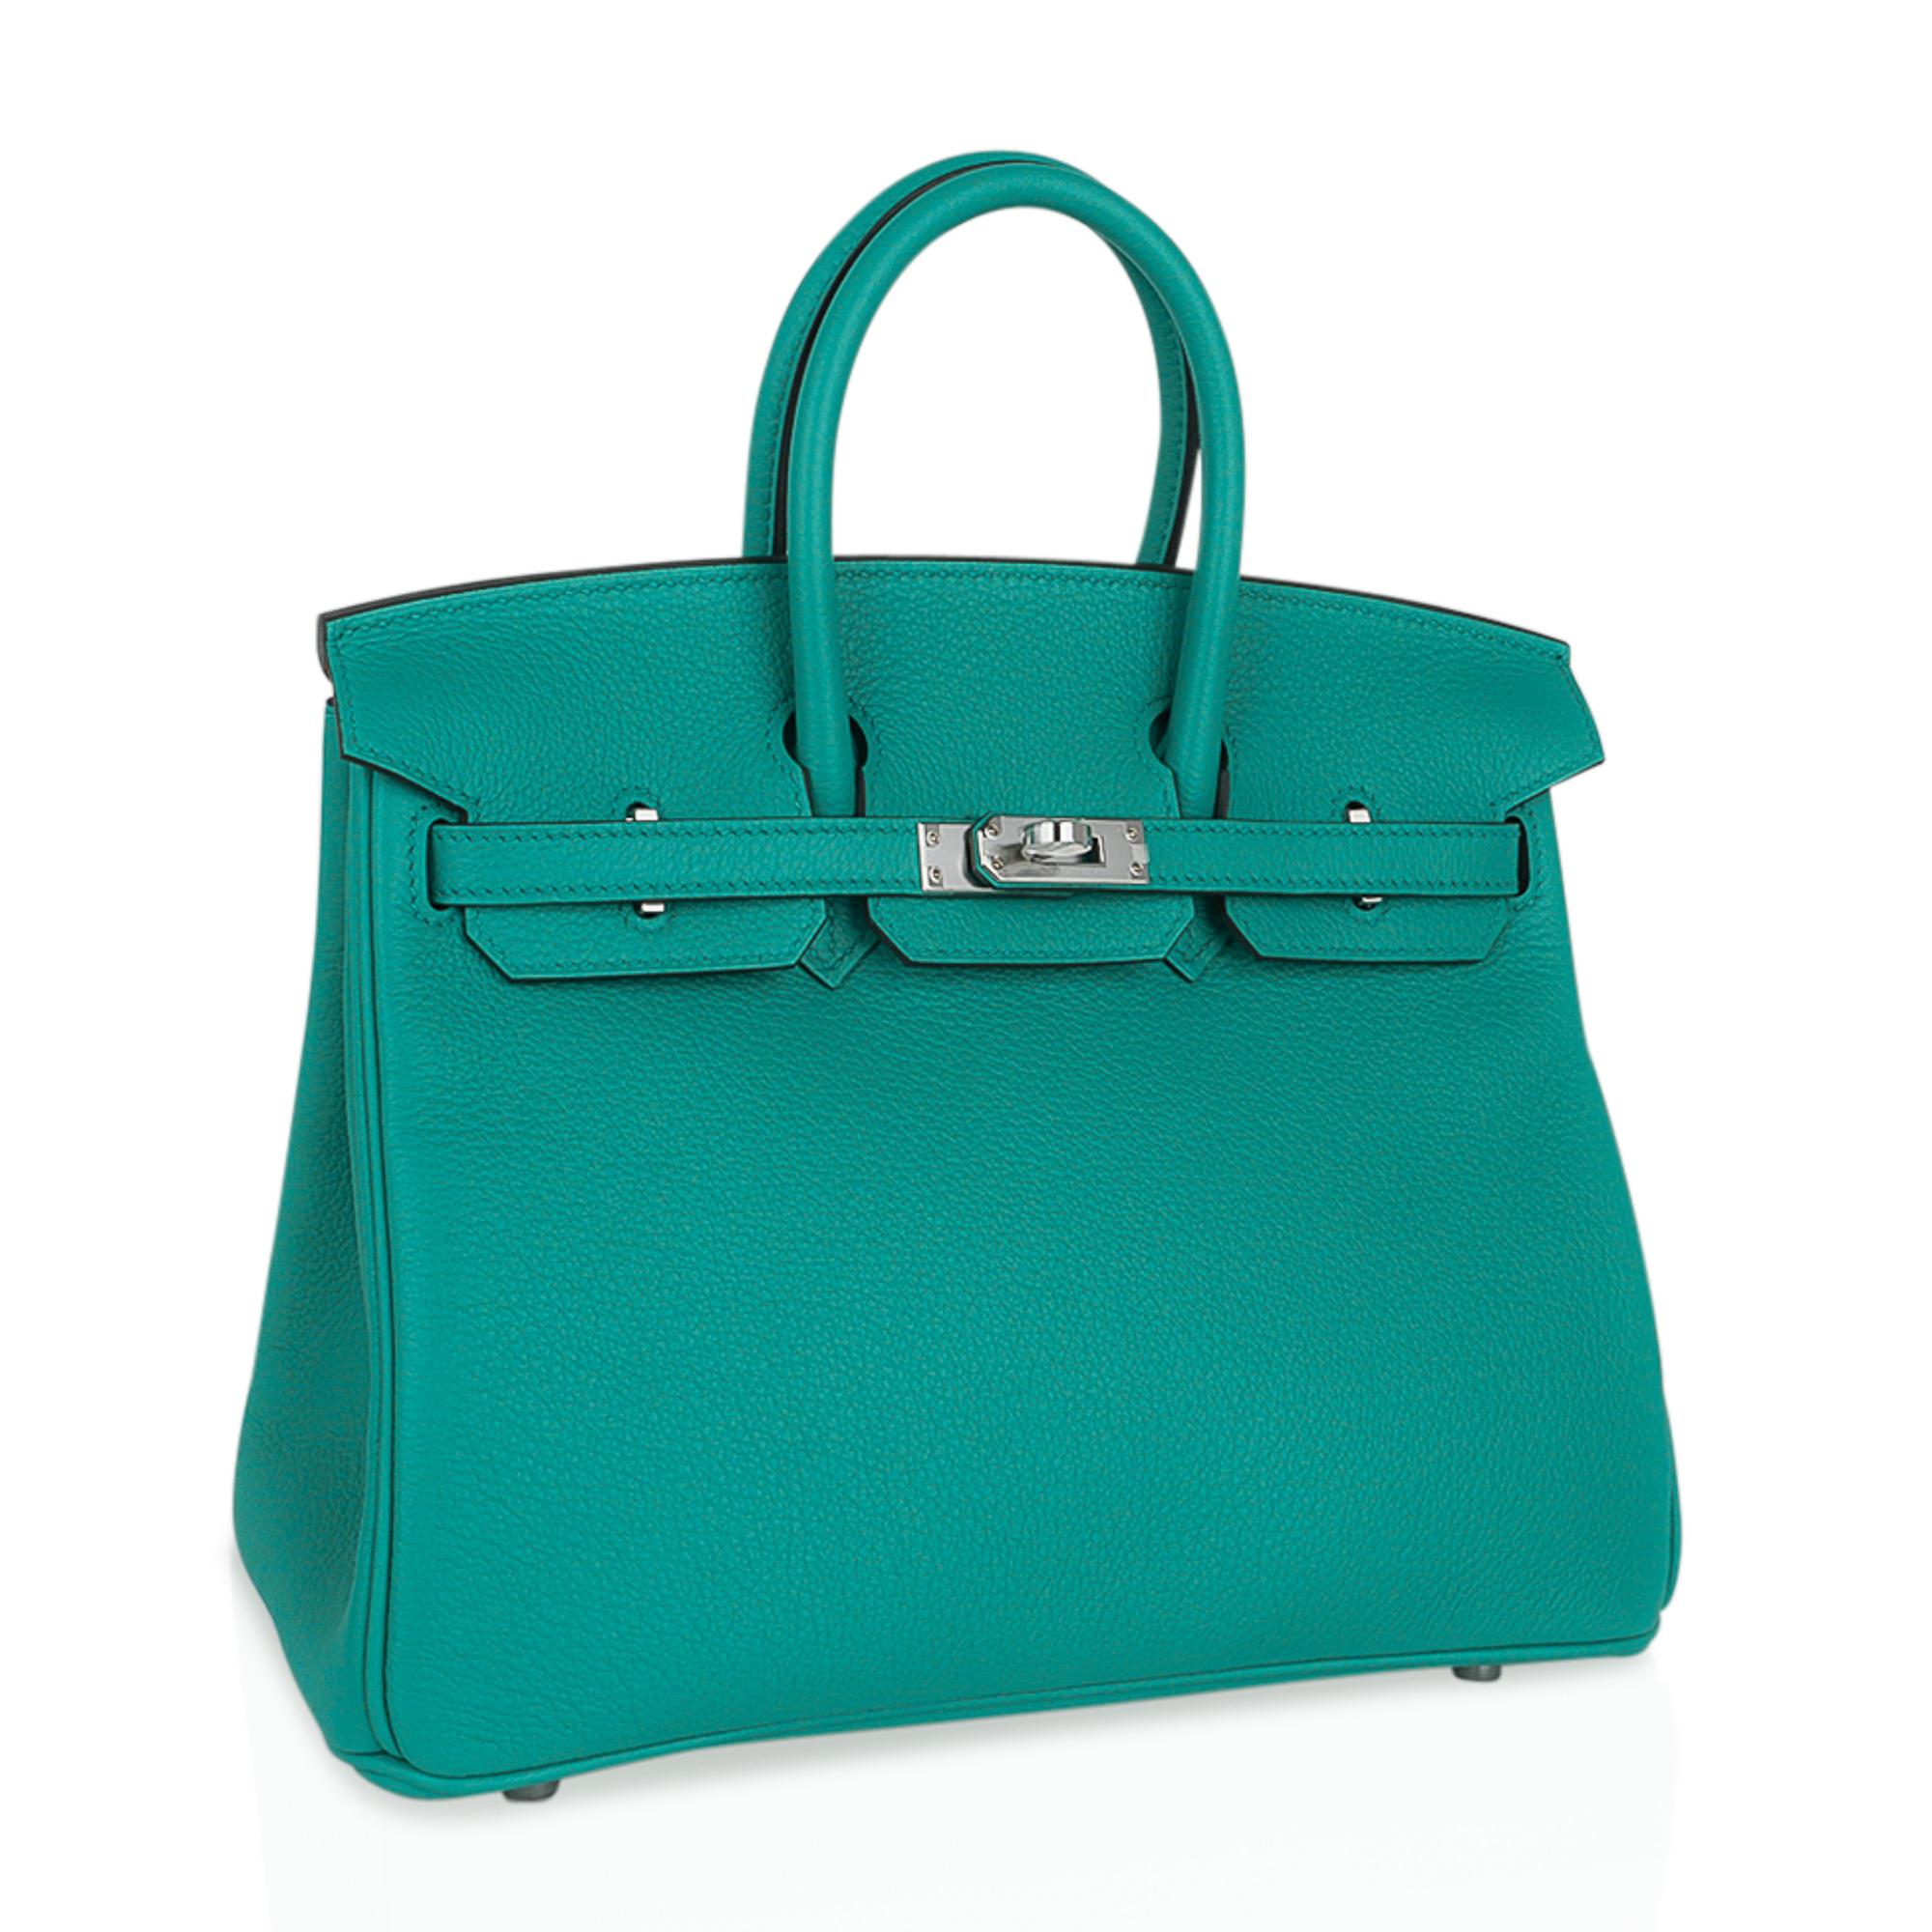 Mightychic offers an Hermes Birkin Verso 25 bag featured in Vert Verone with Rose Lipstick interior.
This beautiful clear green is accentuated in the gorgeous Novillo leather.
A small flat grain, Novillo leather saturates and enhances the colours 